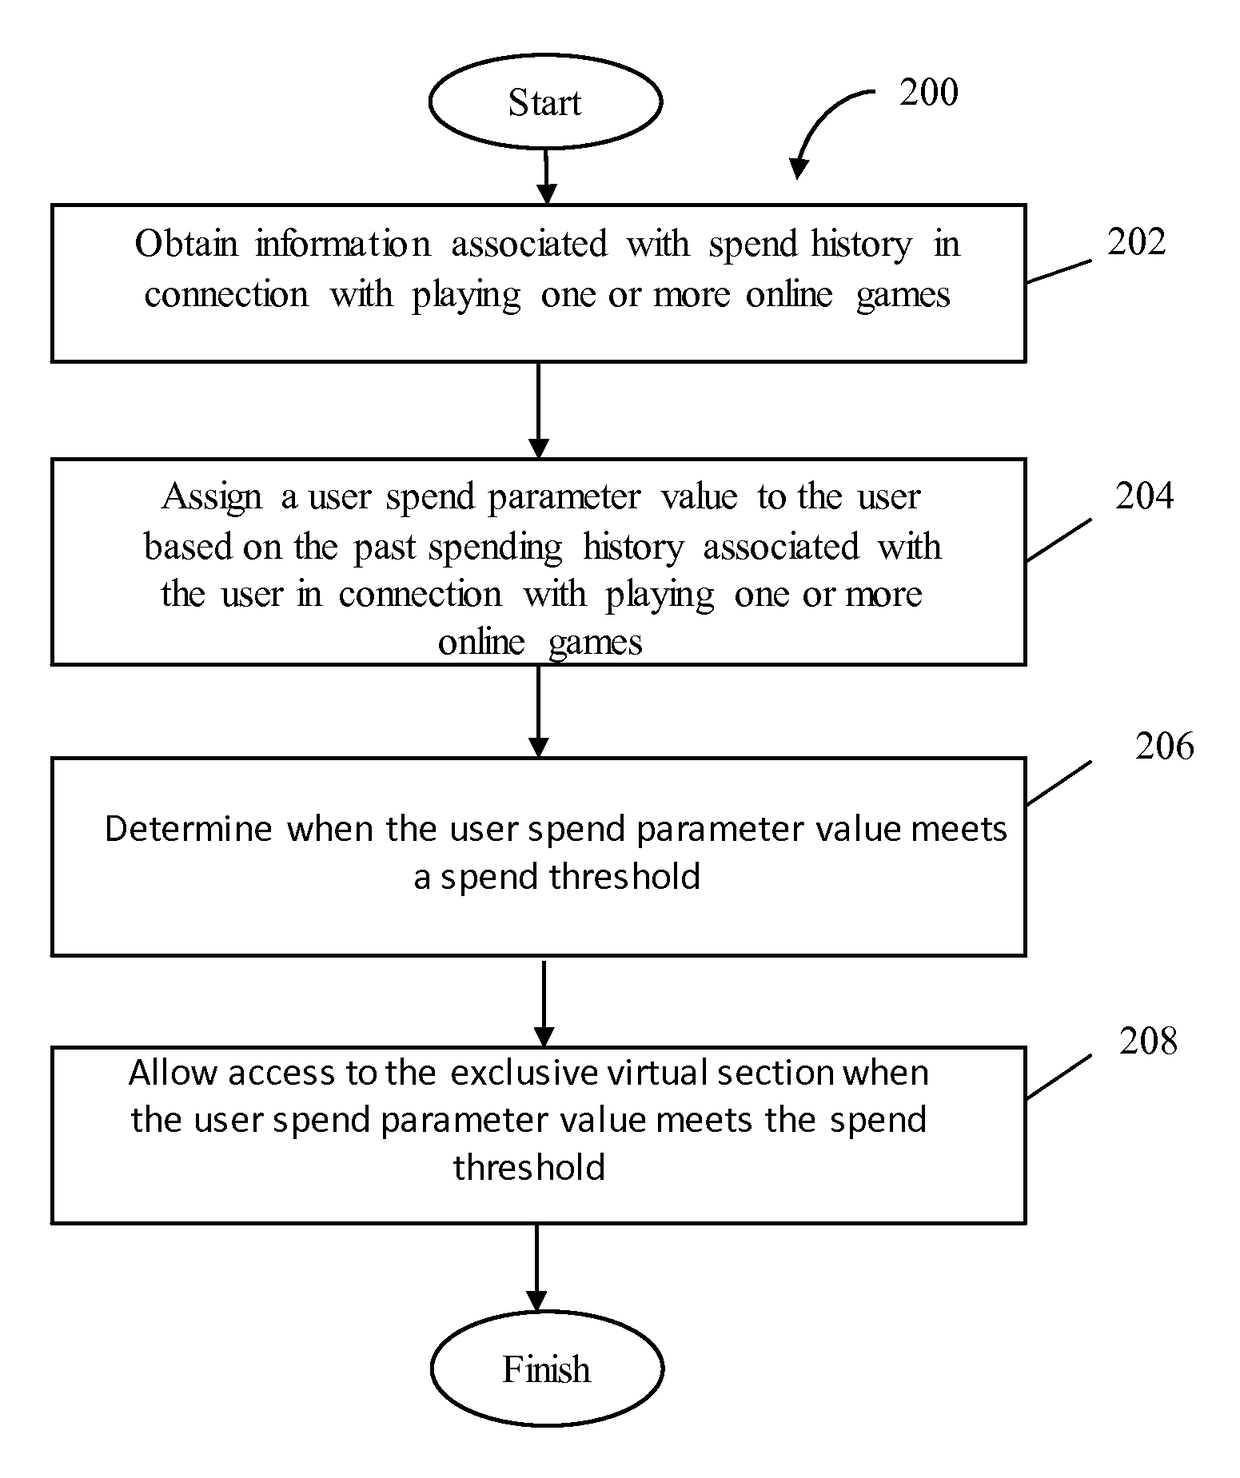 Access to an exclusive virtual section of an online game based on past spending behavior